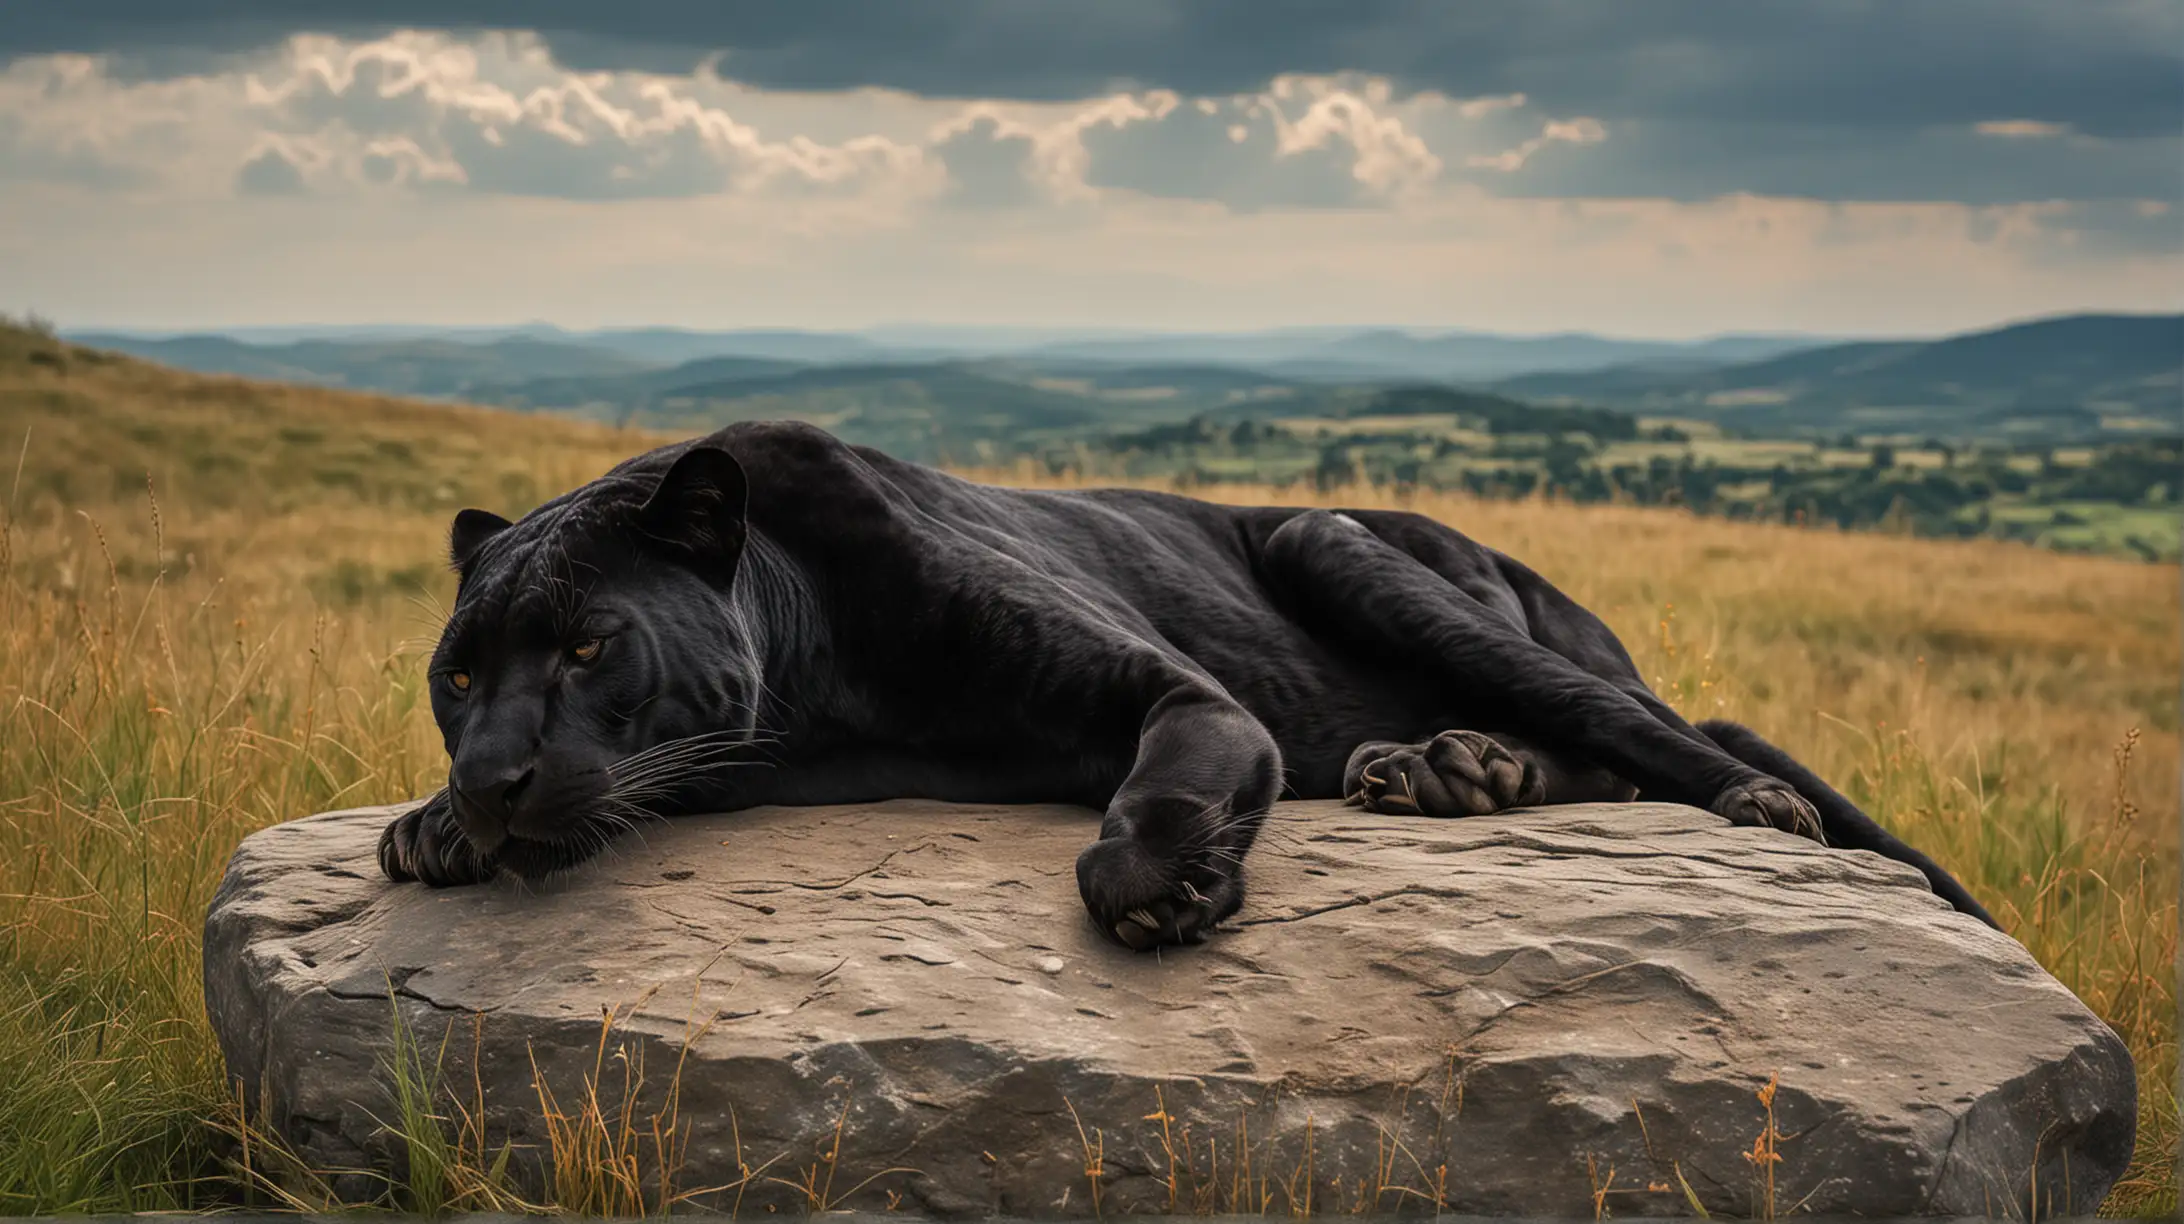 Solitary Black Panther Resting on Grassy Hill